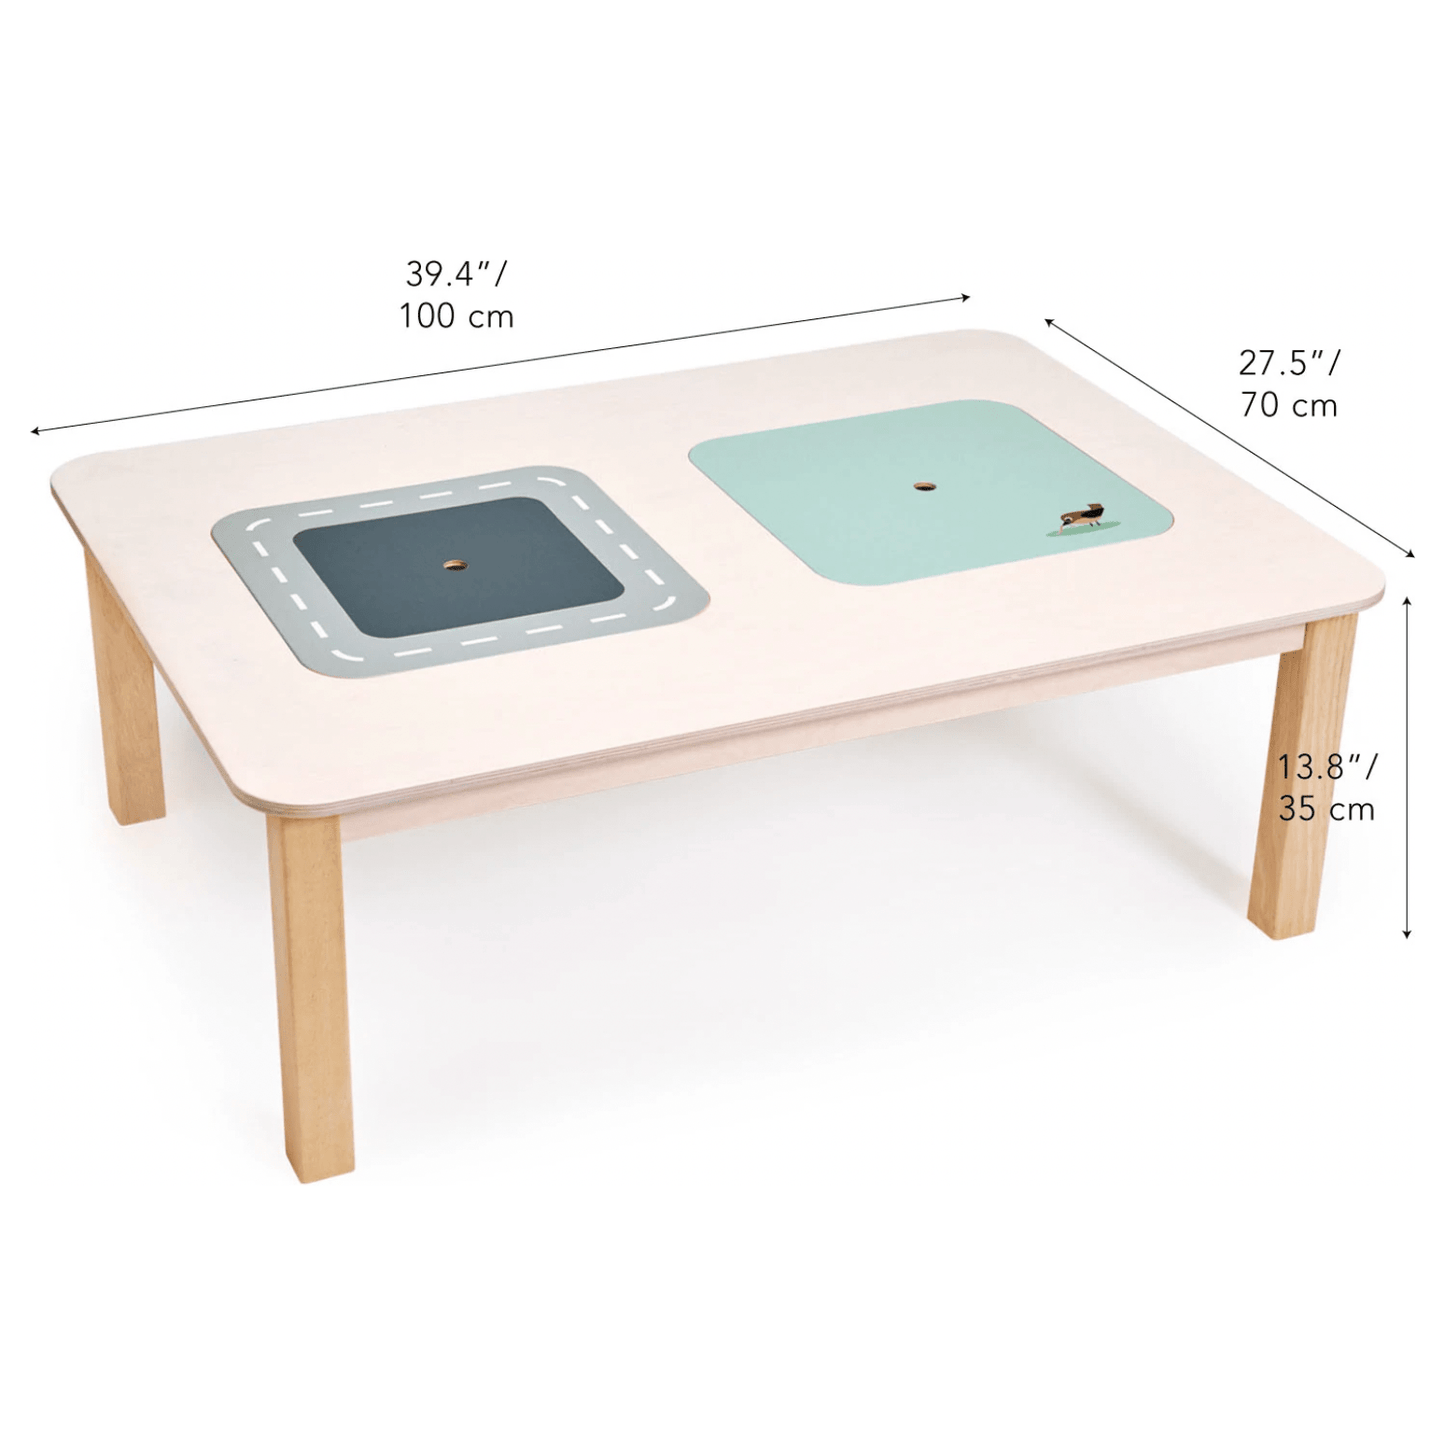 Play Table - The Online Toy Shop - Table - 1